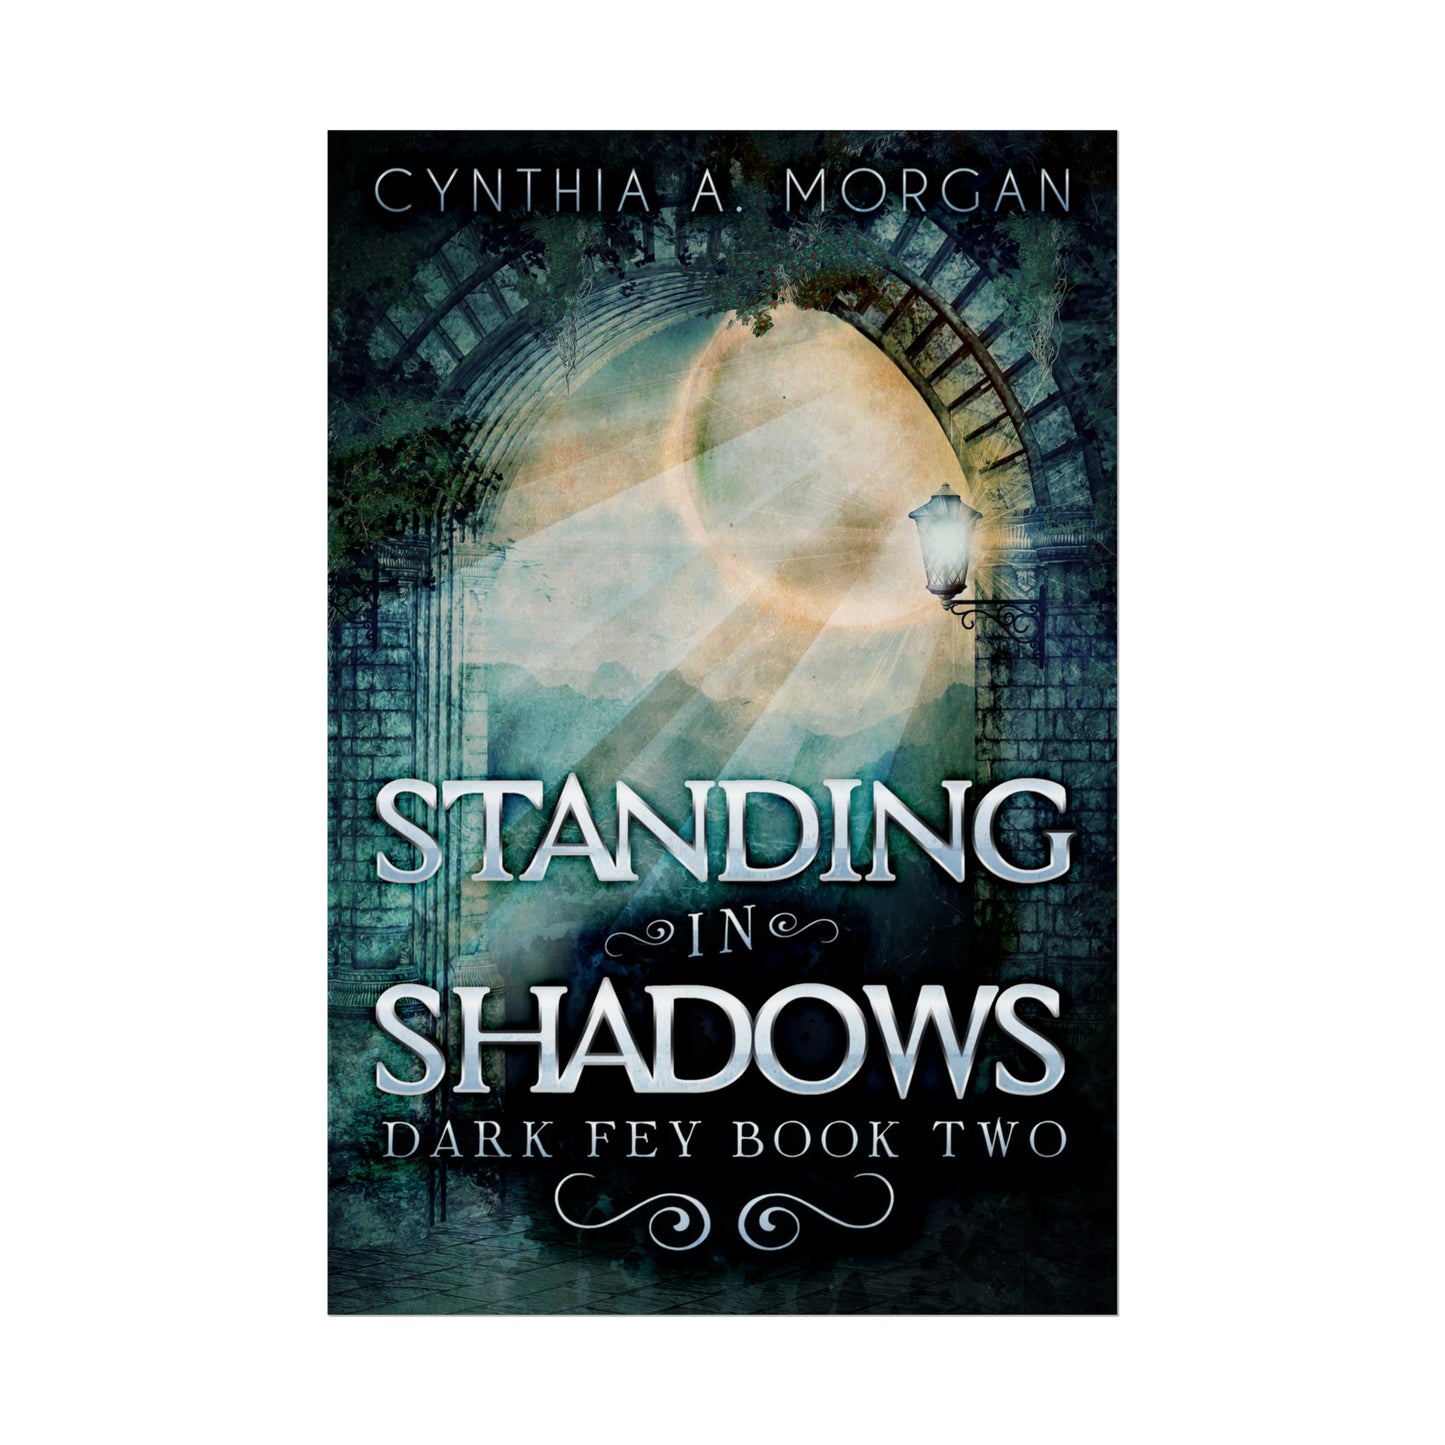 Standing in Shadows - Rolled Poster